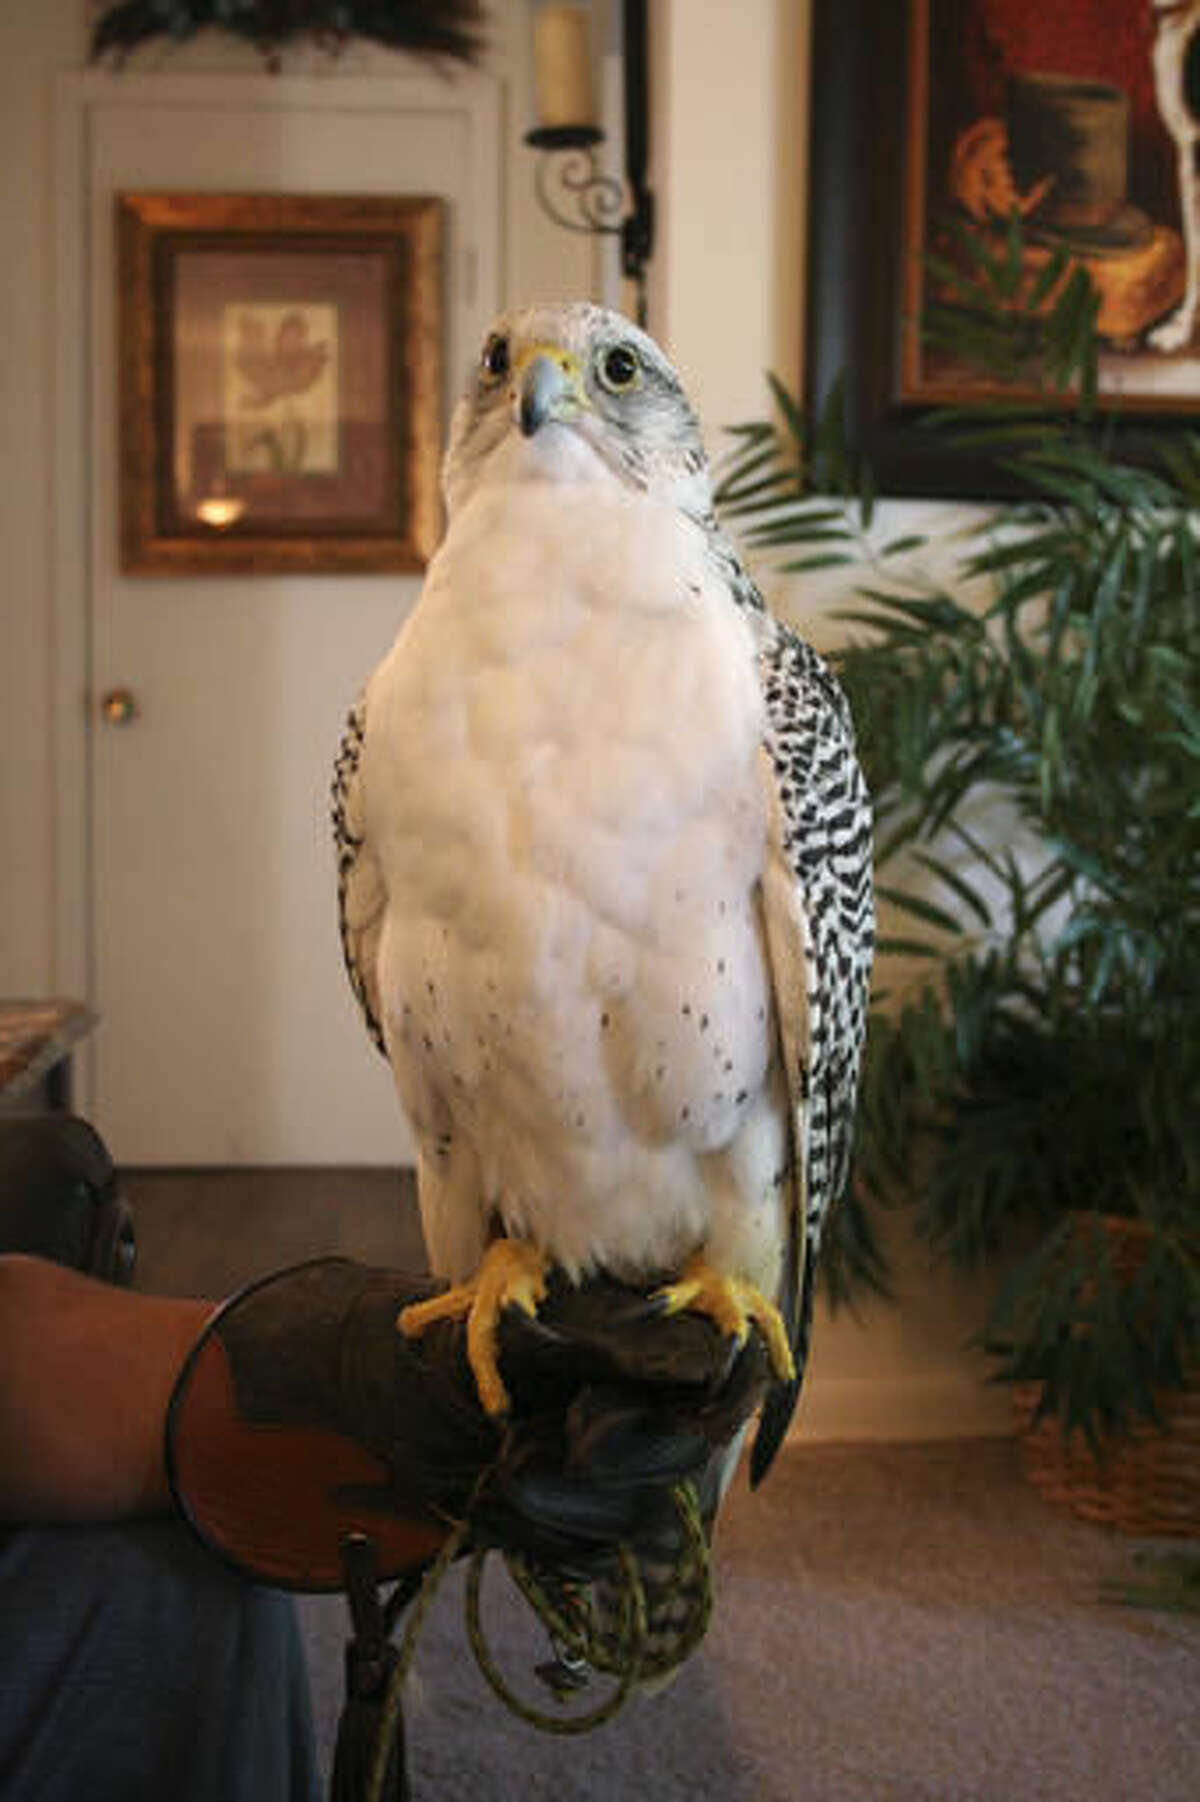 Faith, a 12-year-old gyrfalcon, stands on a perch in July 2016 at the home of Bruce and Mary Williams in Junction City, Ky. For Bruce Williams, falconry has been a lifelong hobby, an interest that started as a child with interest in animals. (Kendra Peek/The Advocate-Messenger via AP)